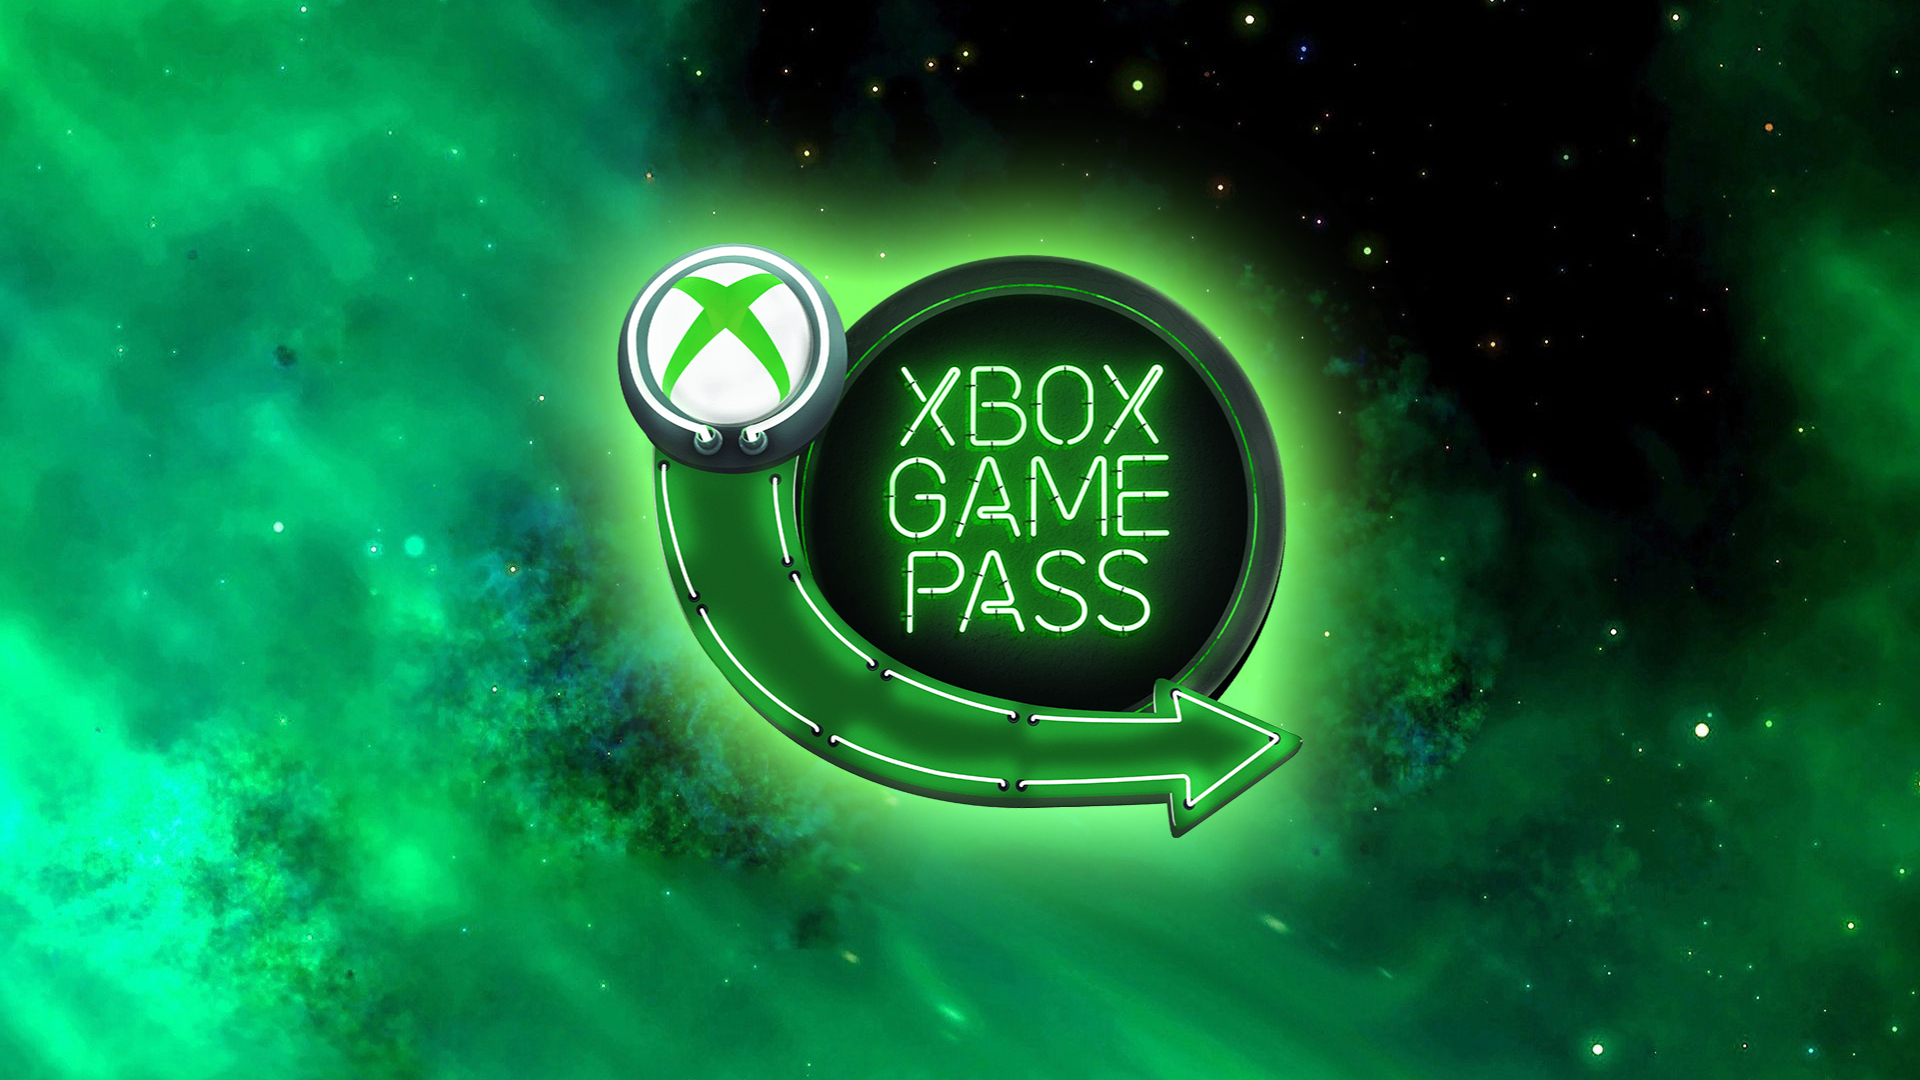 Xbox Game Pass update brings Weird West and 5 other games